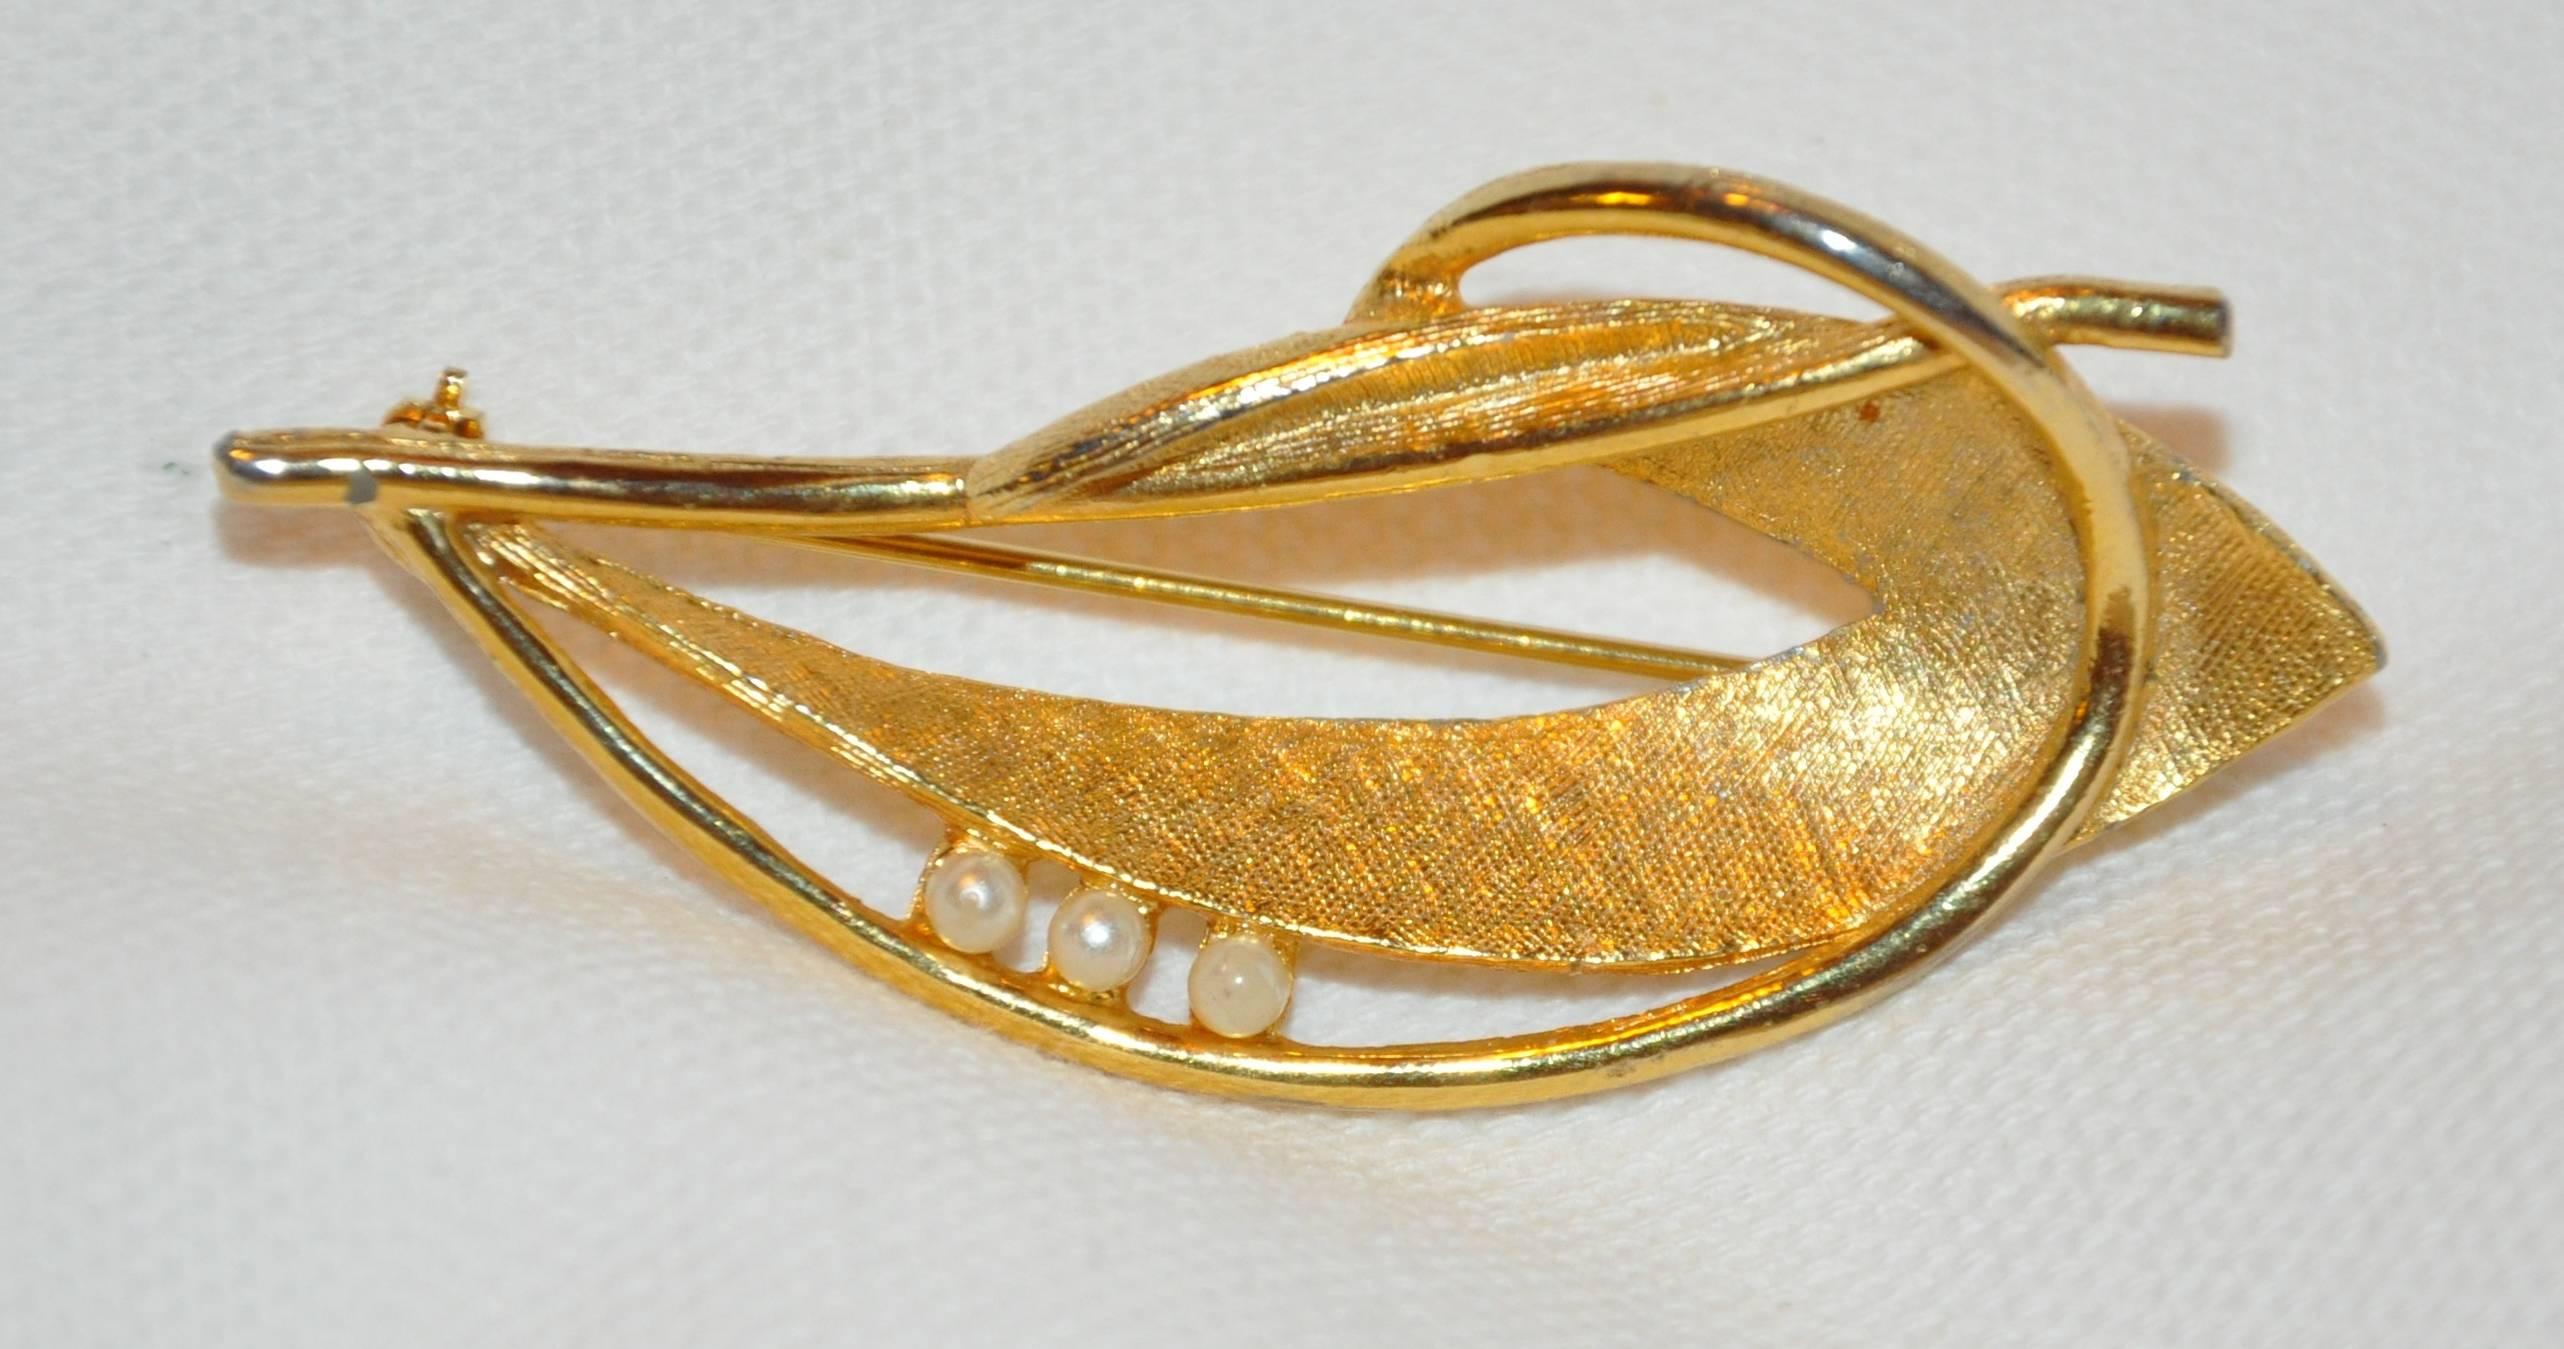        Wonderfully detailed with textured as well as polished gilded gold vermeil finished hardware "Leaf & Vine " brooch is accented with faux pearls, and measures 2 2/8" x 1", made in United States.